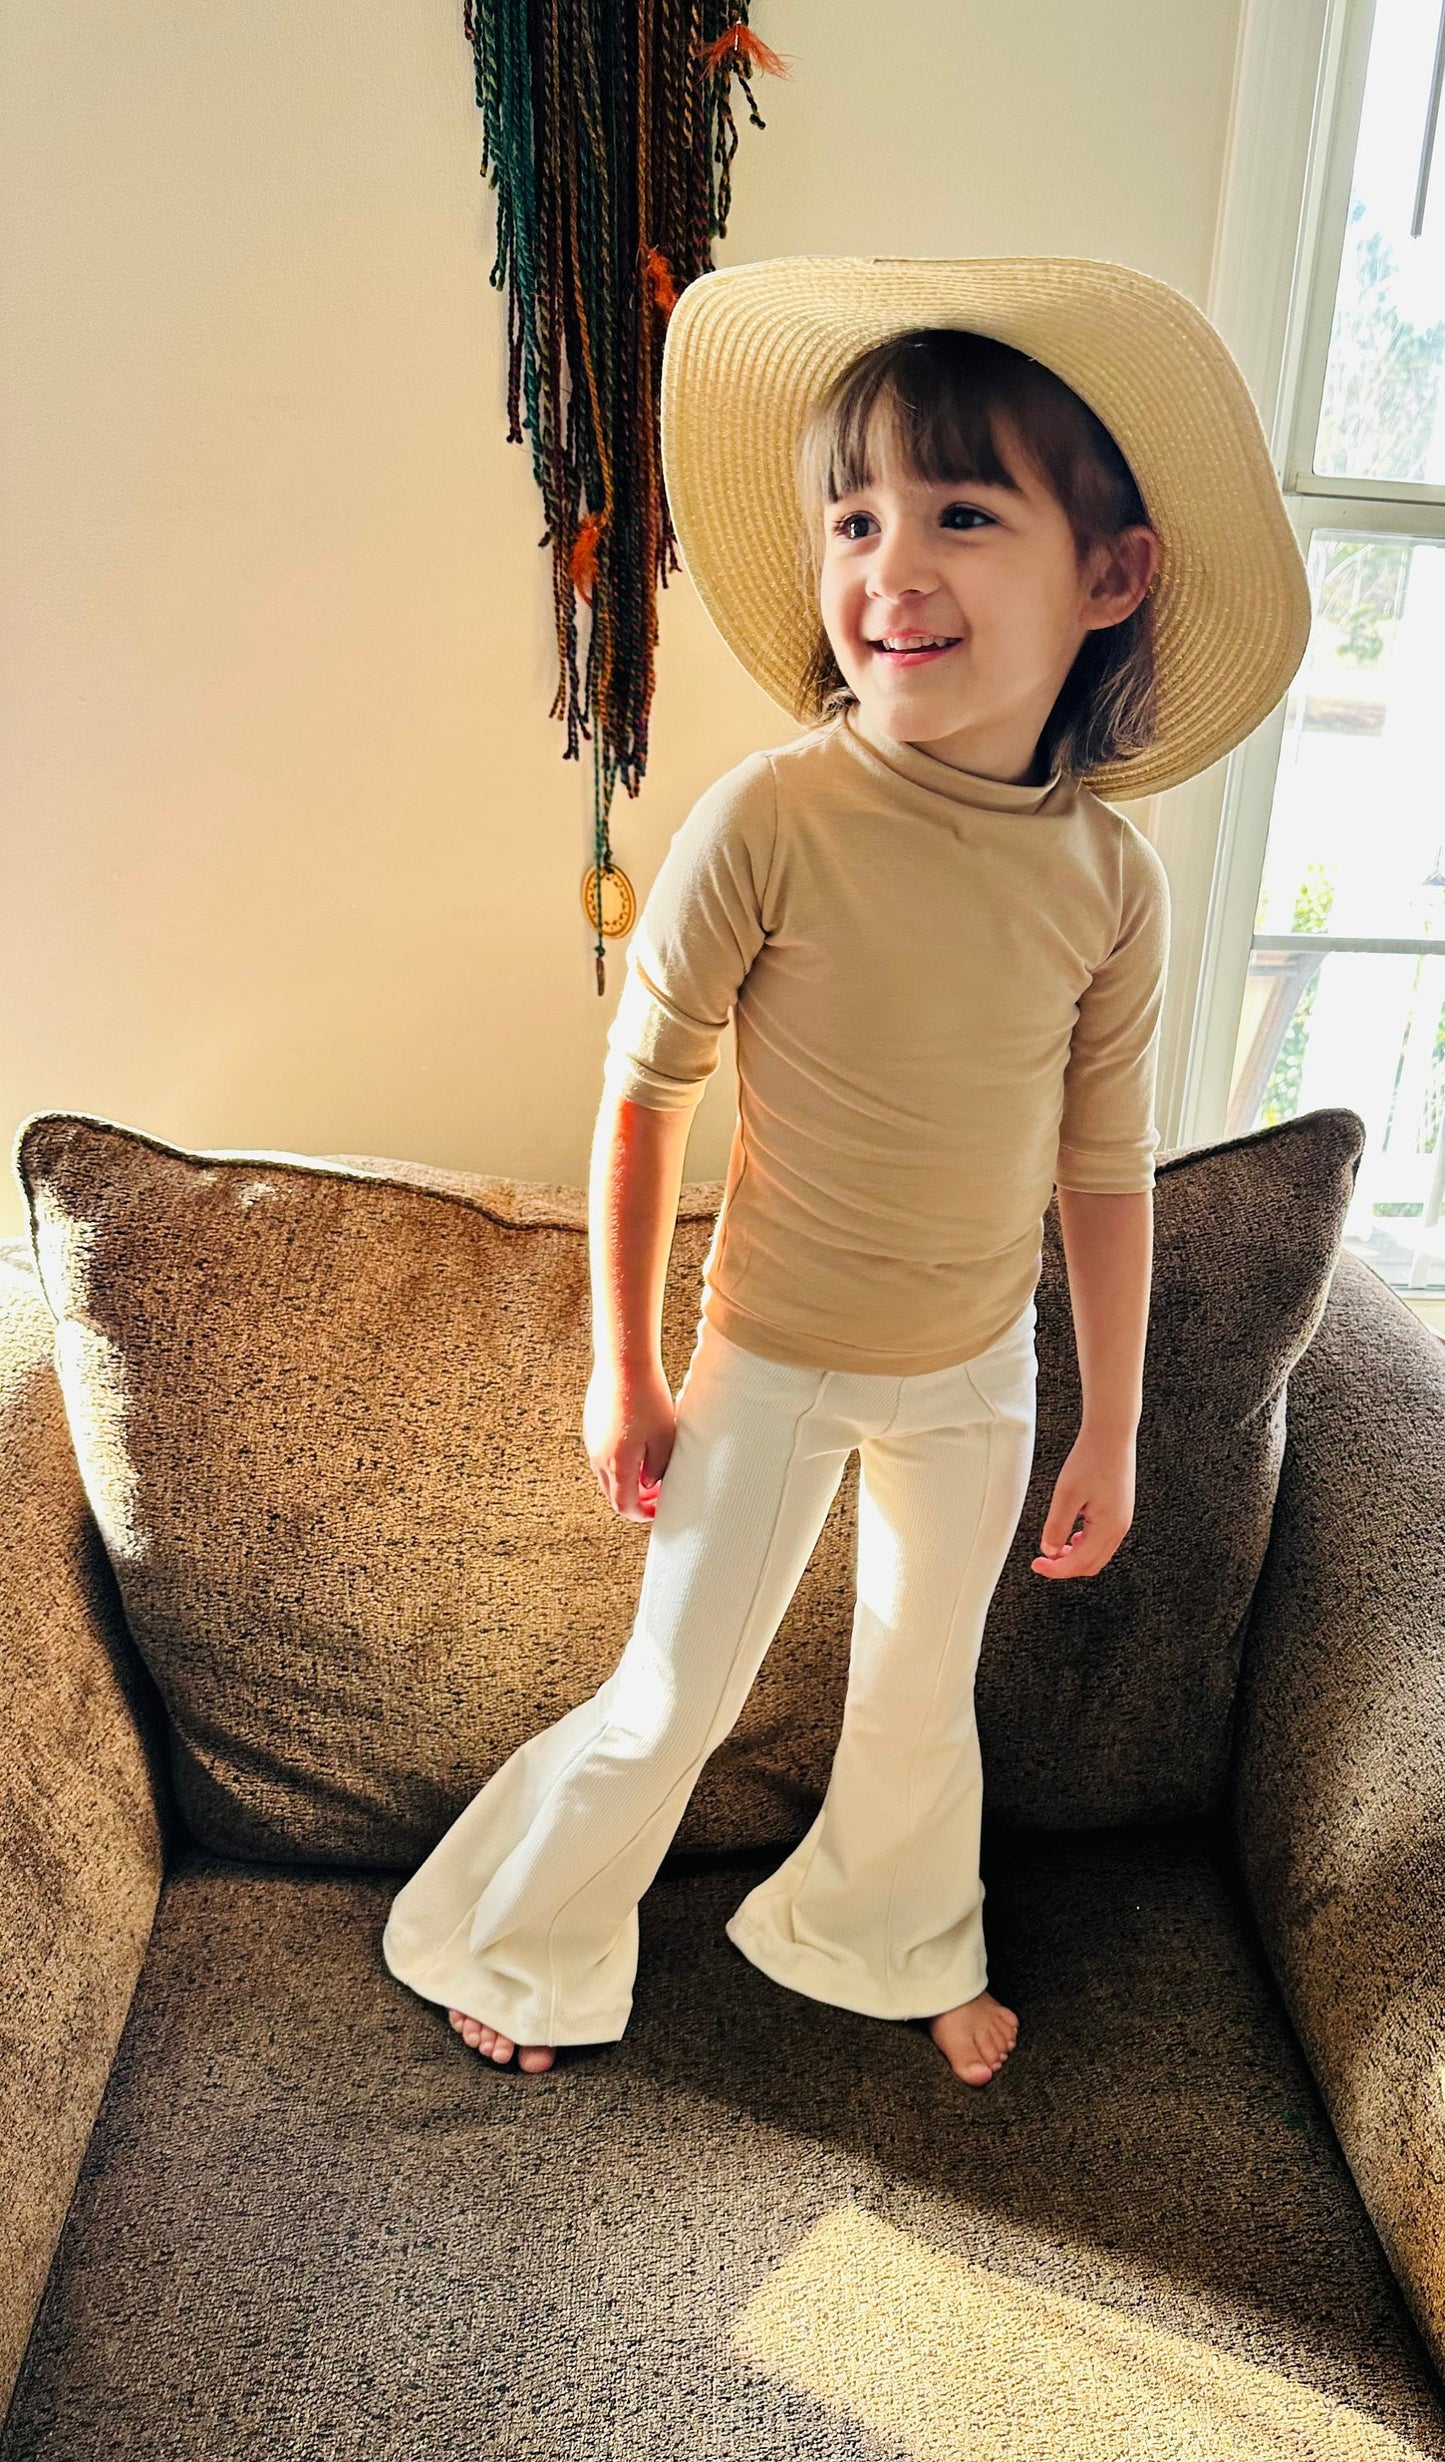 Ivory Corduroy Bells, 3/4 Sleeve shirt|Girls Spring/Summer Outfits|Girls Flare Bell Bottoms|Wholesome Goods Co